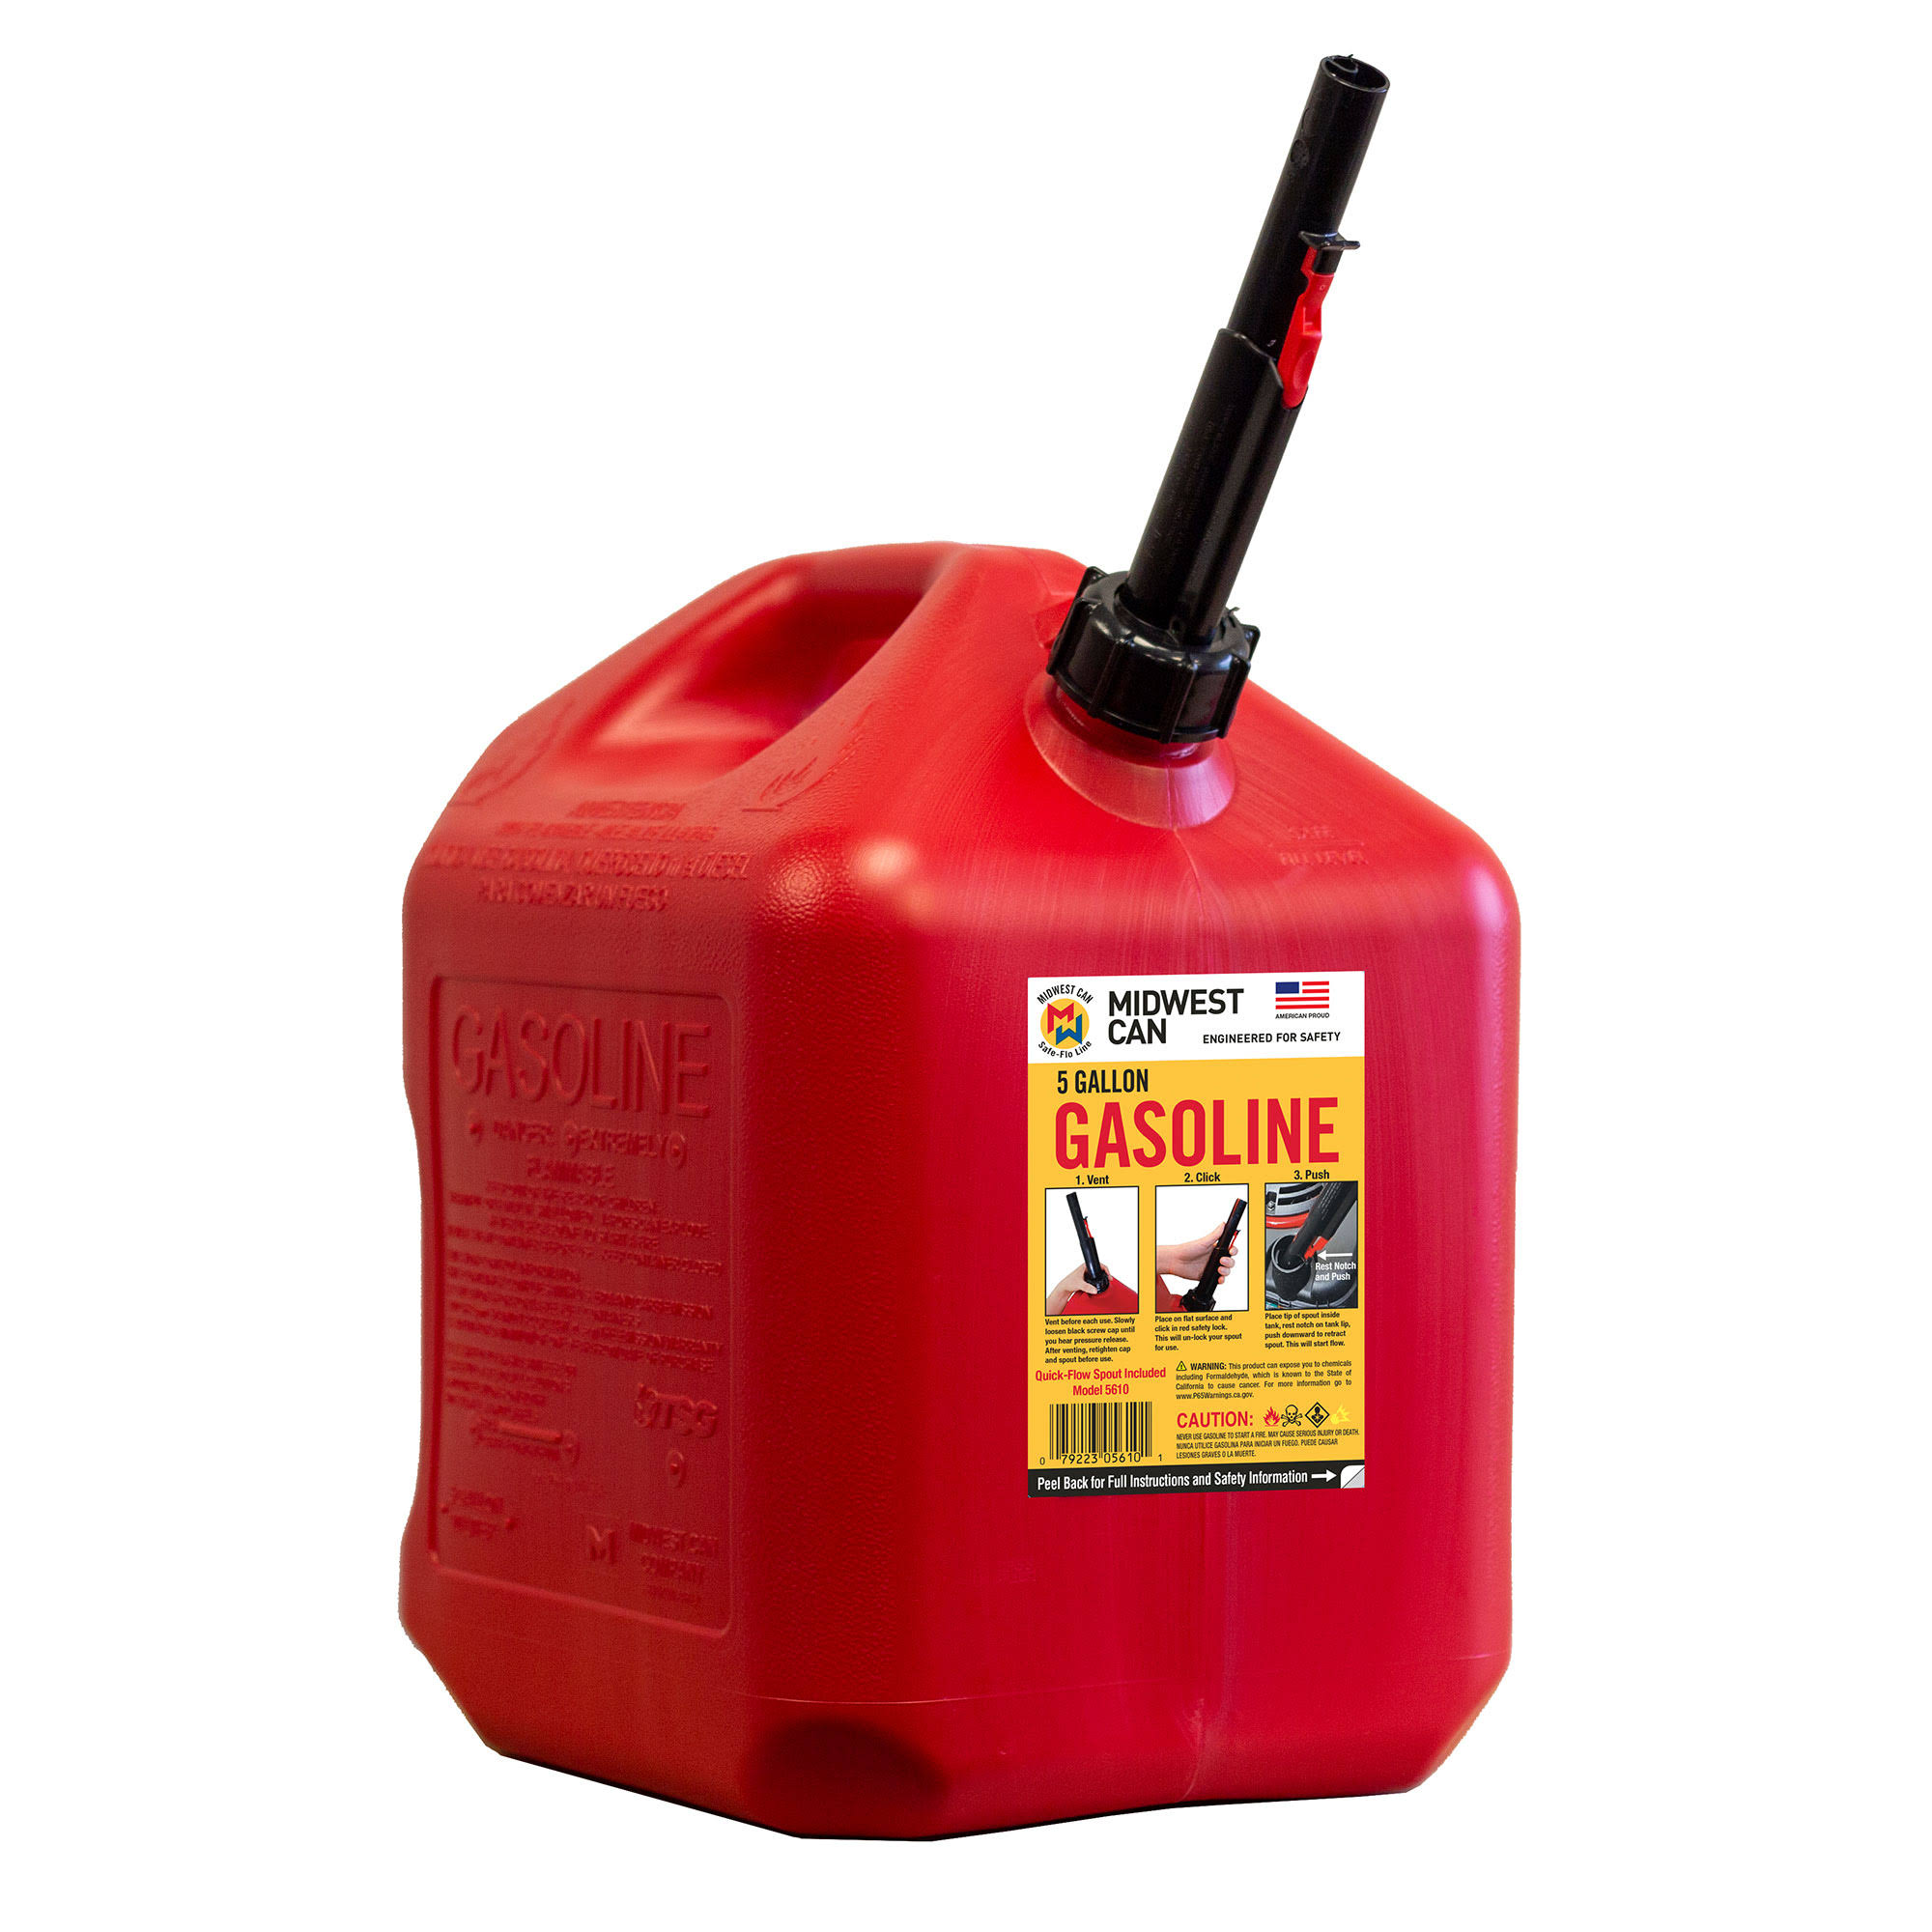 Midwest Gasoline Can, 5 Gallon